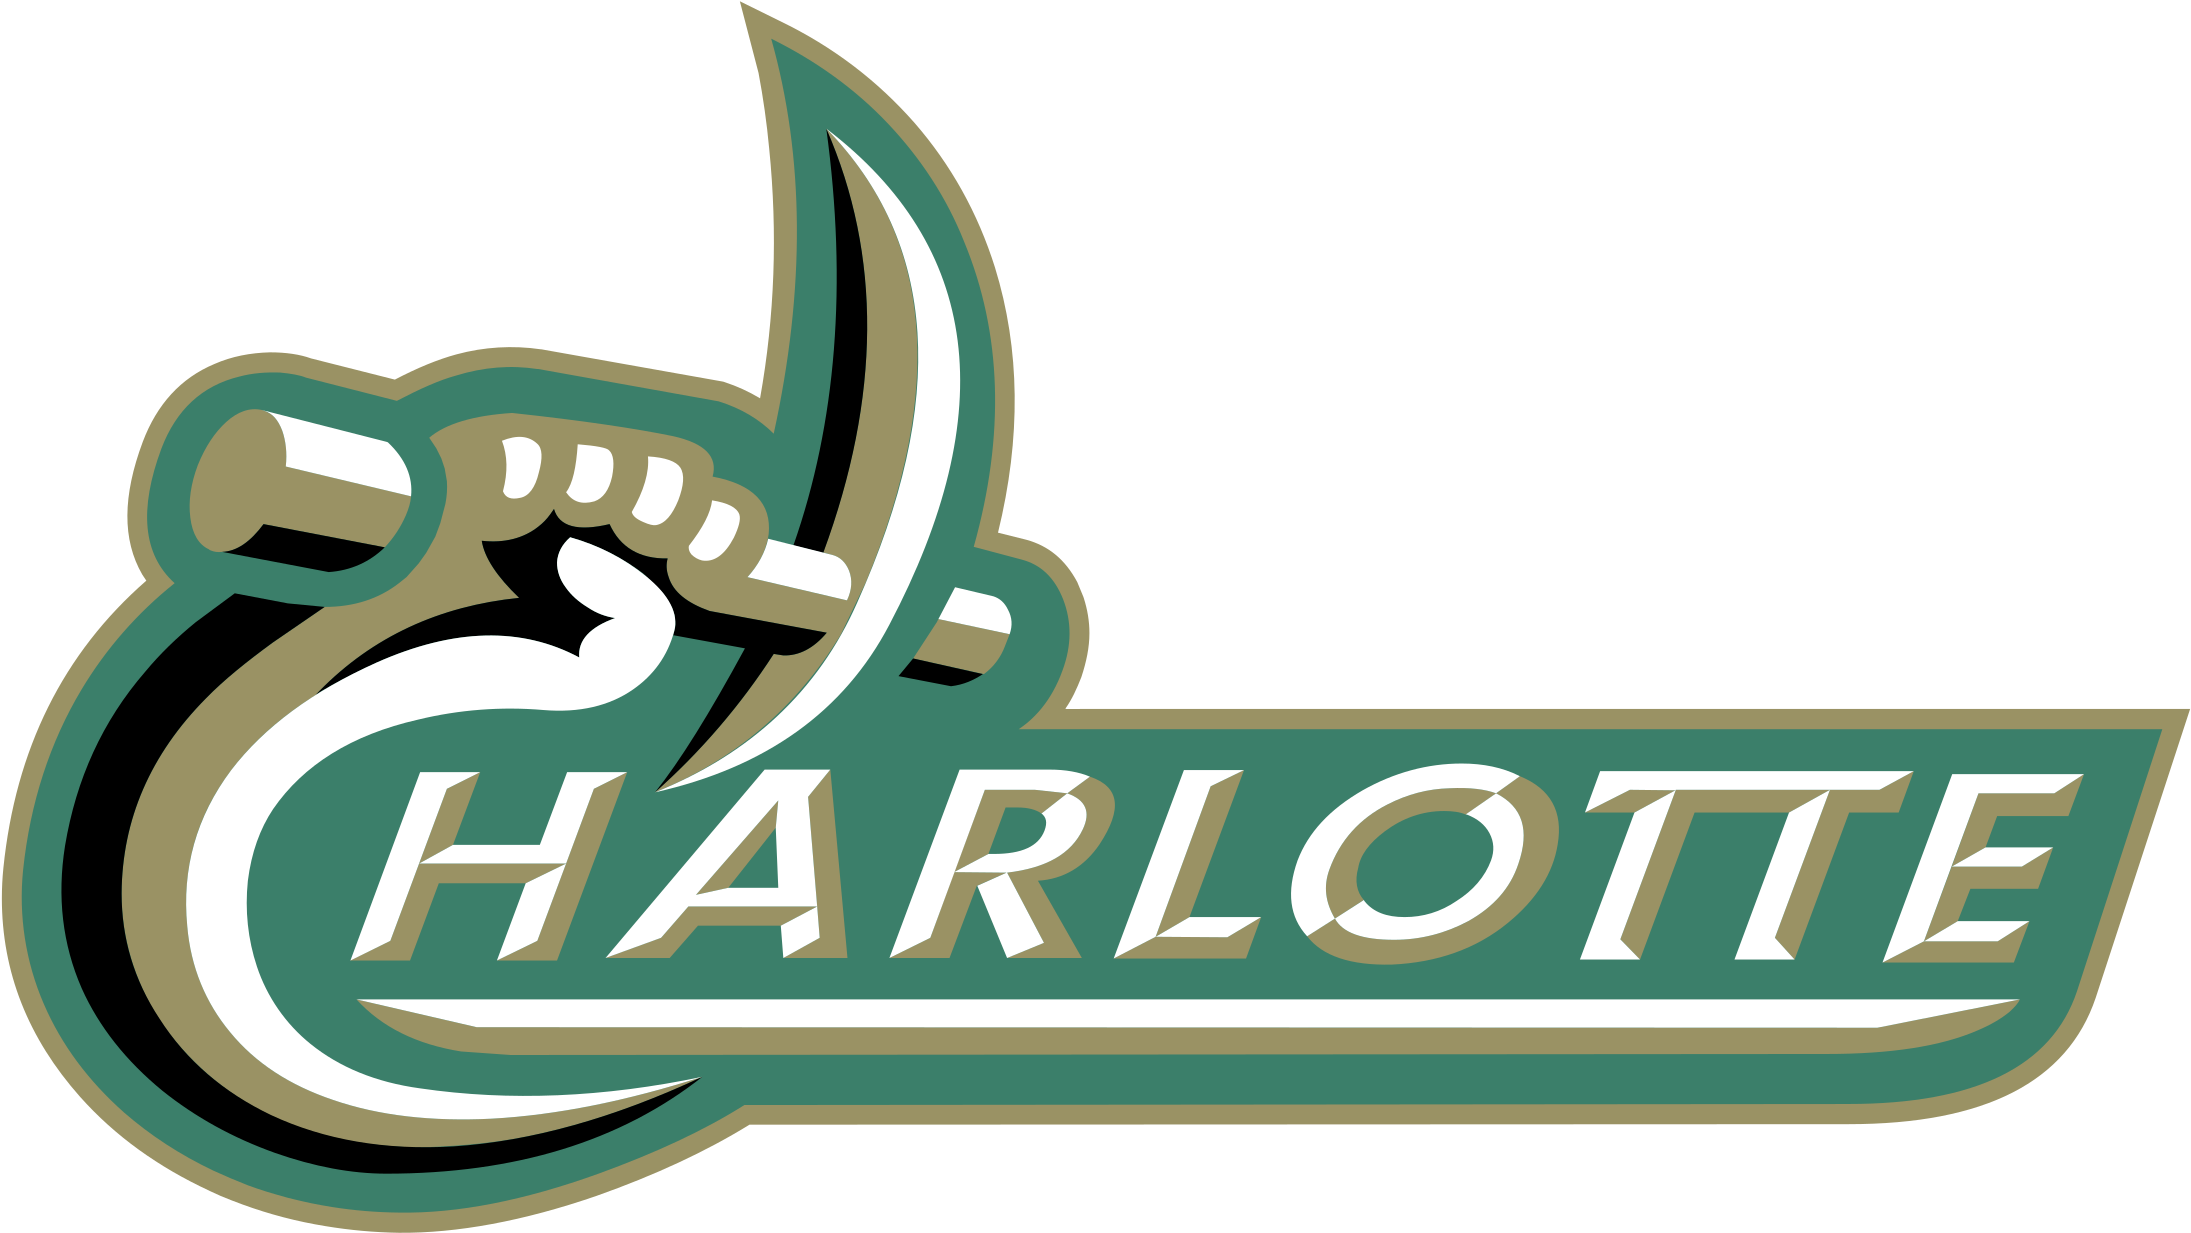 Download Charlotte 49ers Logo Png Transparent - Charlotte 49ers PNG Image  with No Background 